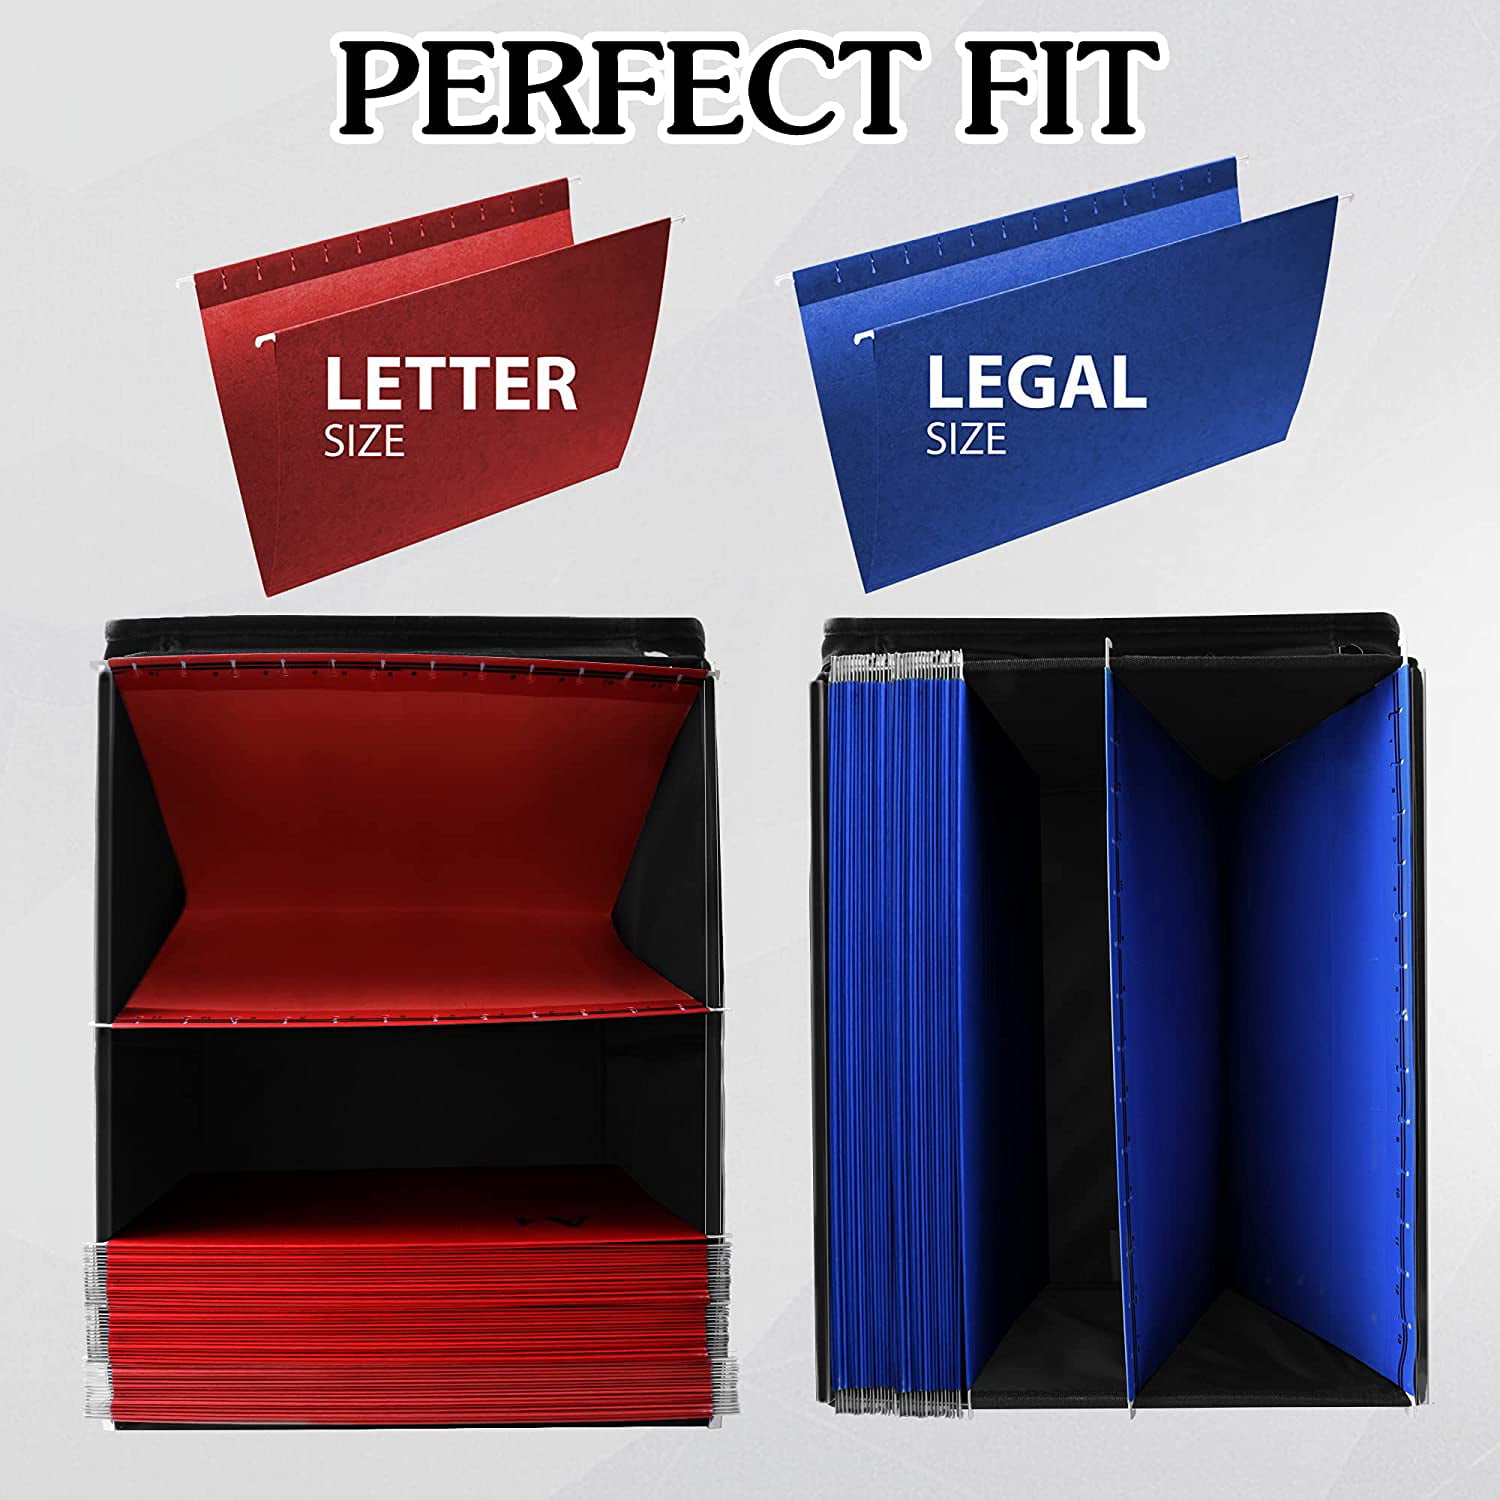 File Box with Lock Portable Document Fireproof Storage Box with Handle for Home and Office HugeHard Collapsible Fireproof Document Box File Organizer Box for Letter Legal Folder Certifications Books 